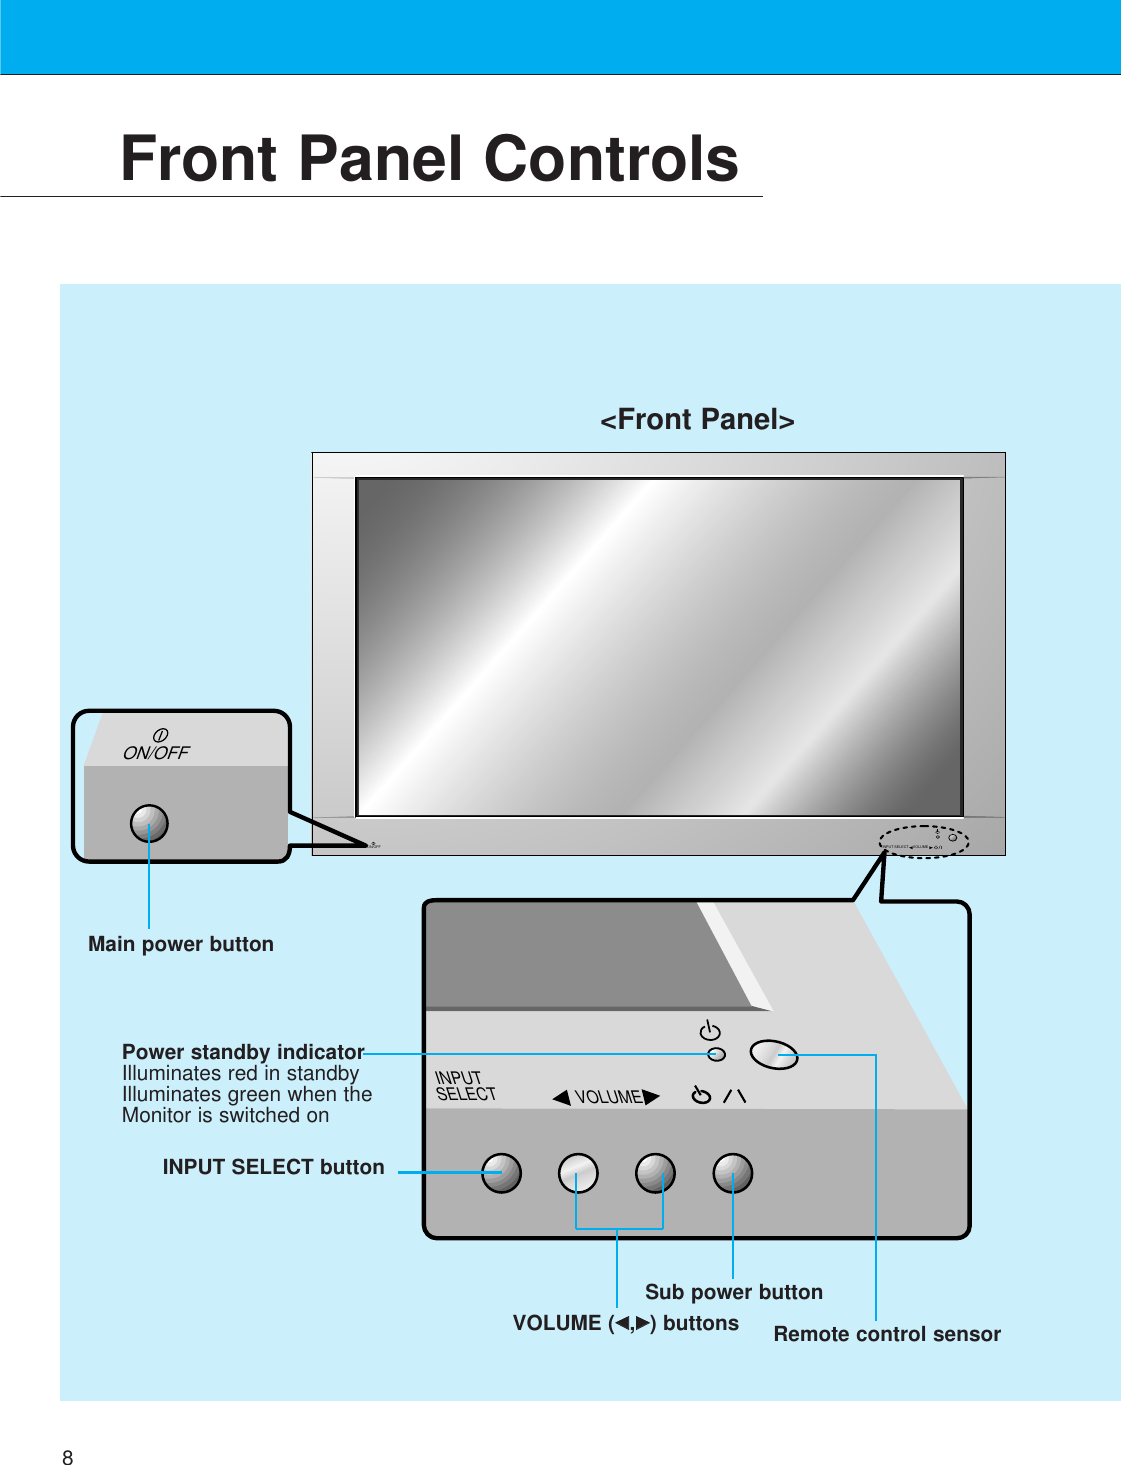 8Front Panel ControlsON/OFFON/OFF INPUT SELECT VOLUME INPUT SELECT VOLUME&lt;Front Panel&gt;Main power buttonINPUT SELECT buttonPower standby indicatorIlluminates red in standbyIlluminates green when theMonitor is switched onSub power buttonVOLUME (FF,GG) buttons Remote control sensor